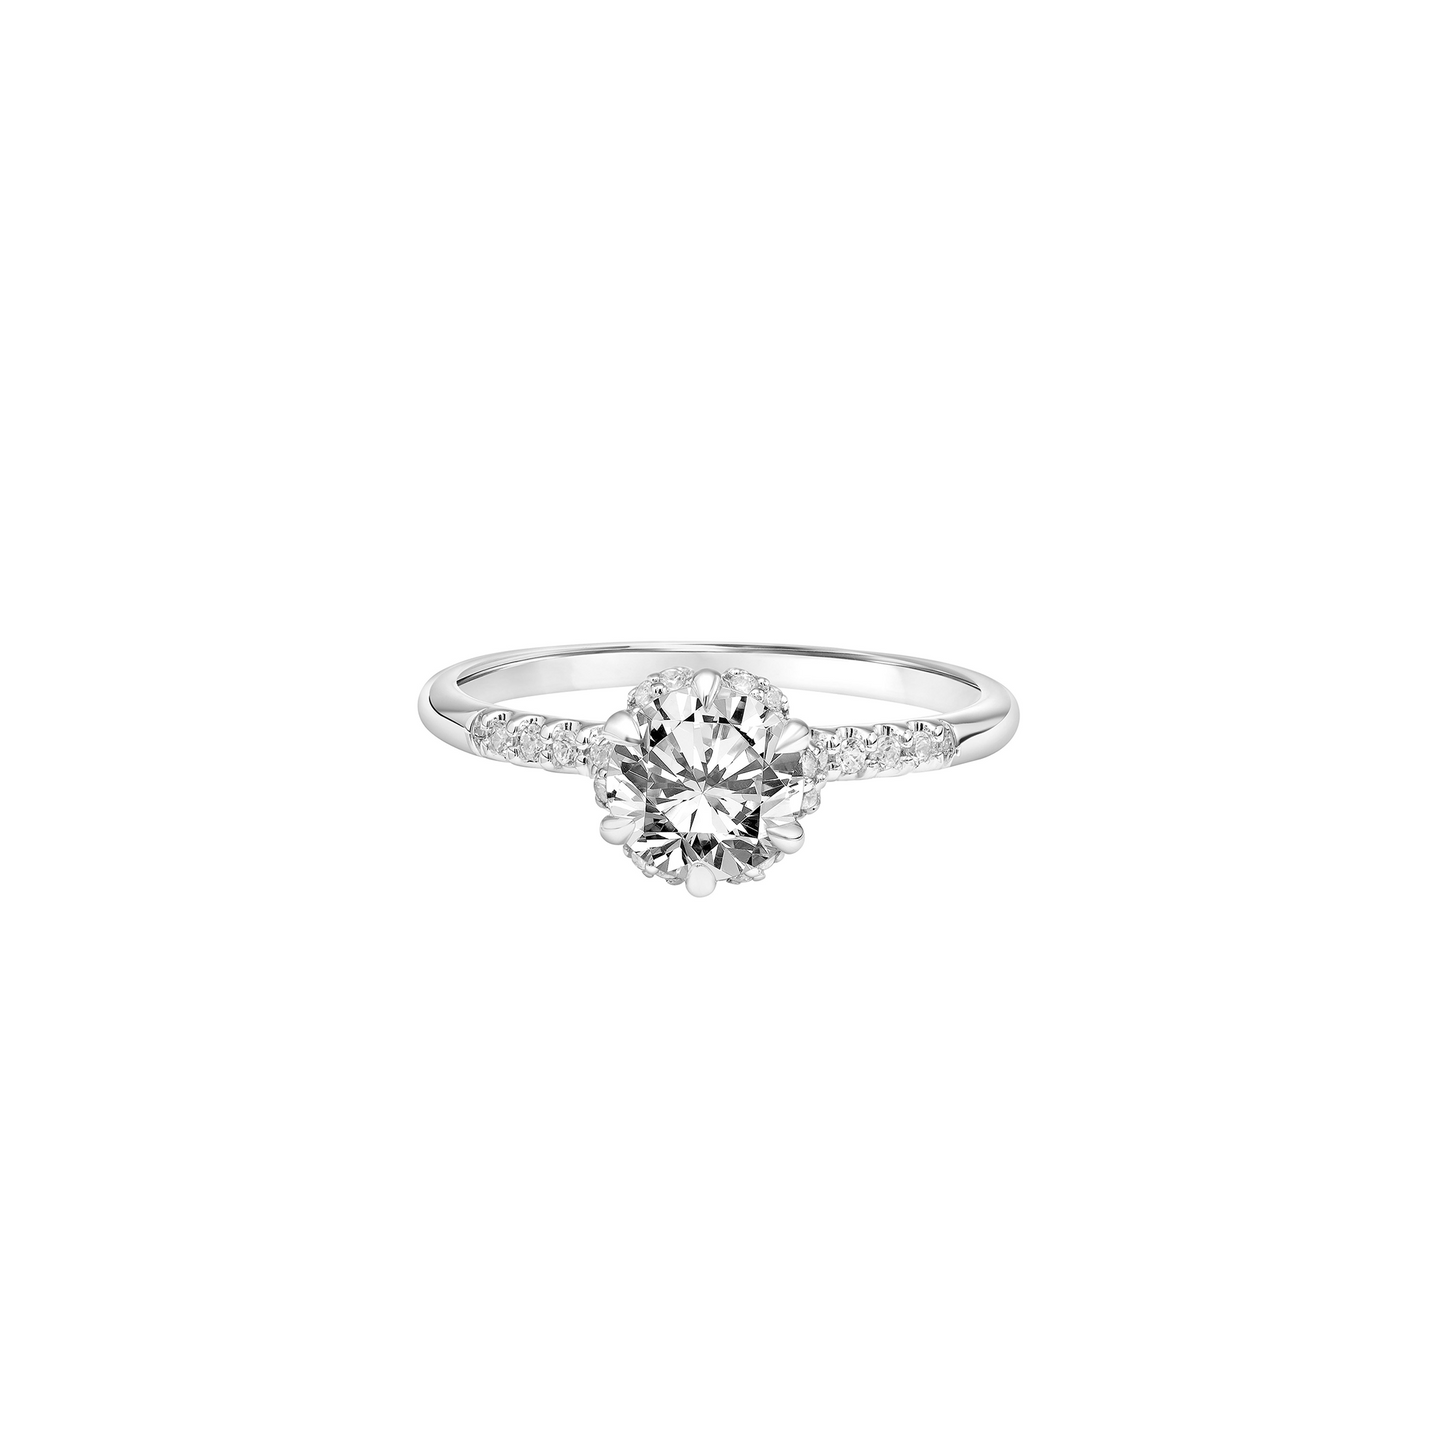 Fink's Exclusive 14K White Gold Round Diamond Six Prong Engagement Ring